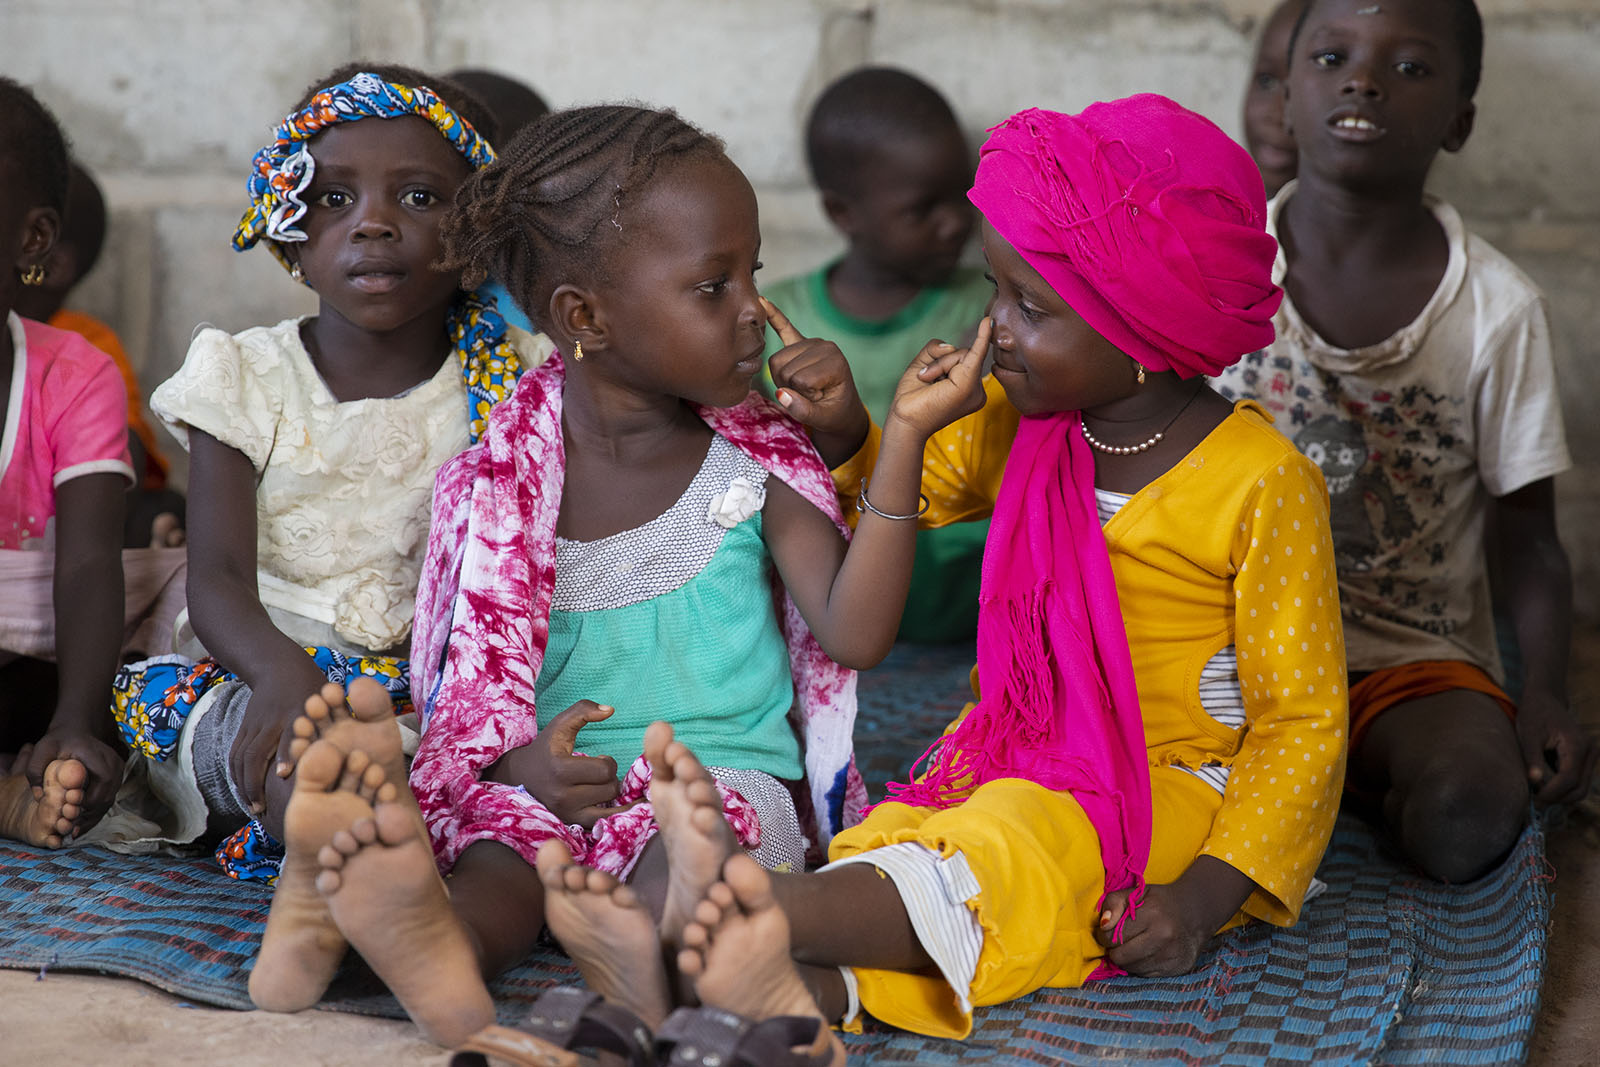  Hothia Balde, left, and Ansata Diao get a little distracted while being taught prayers from The Quran on March 09, 2019 in Kolda, Senegal. While the women are watching Gangaa, Mamadou (not pictured) takes this time to look after the children. 